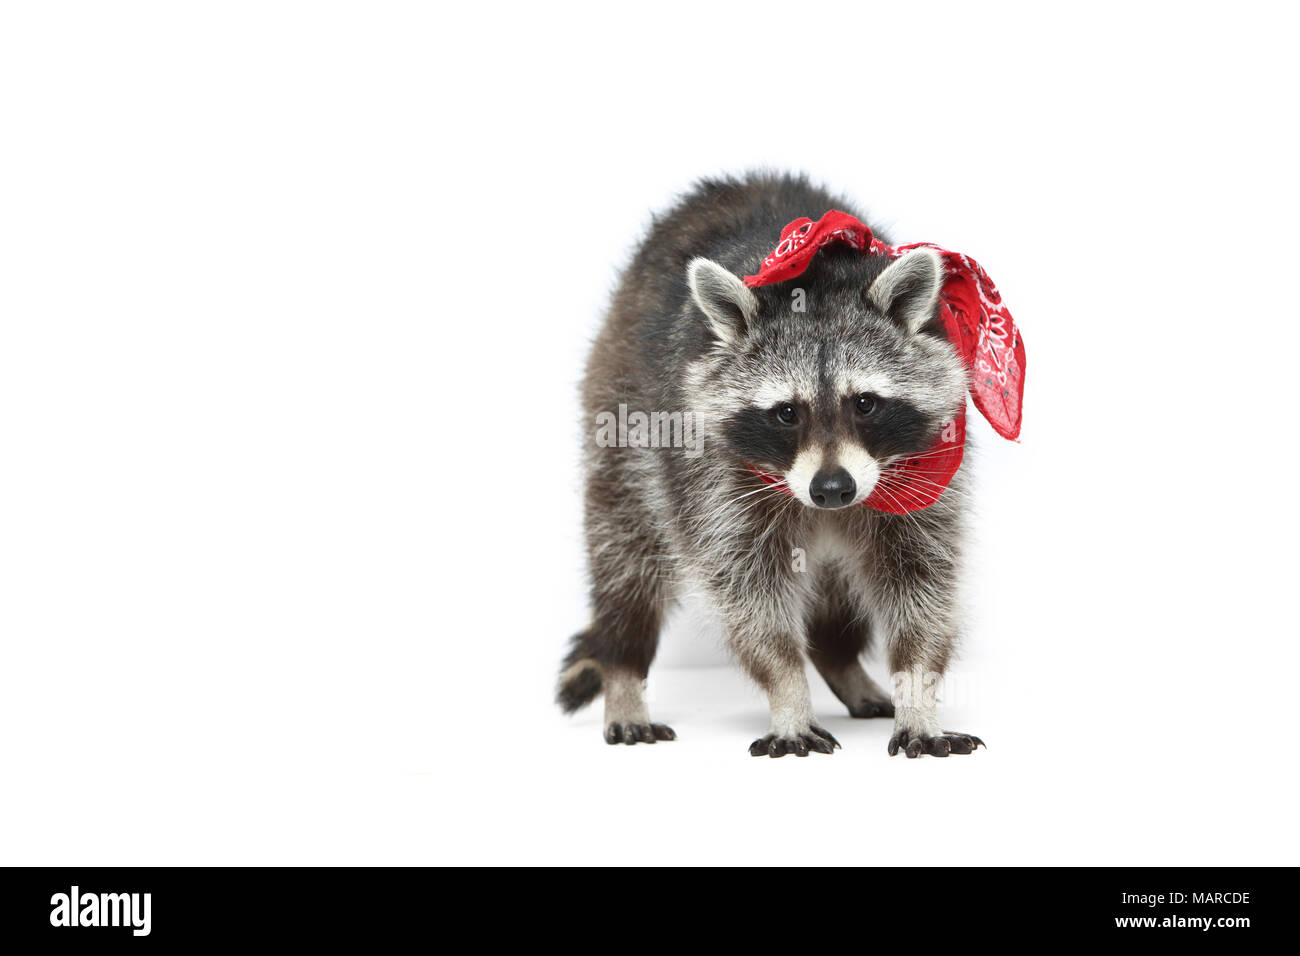 Raccoon (Procyon lotor). Adult standing, wearing a red scarf. Studio picture against a white background. Germany Stock Photo